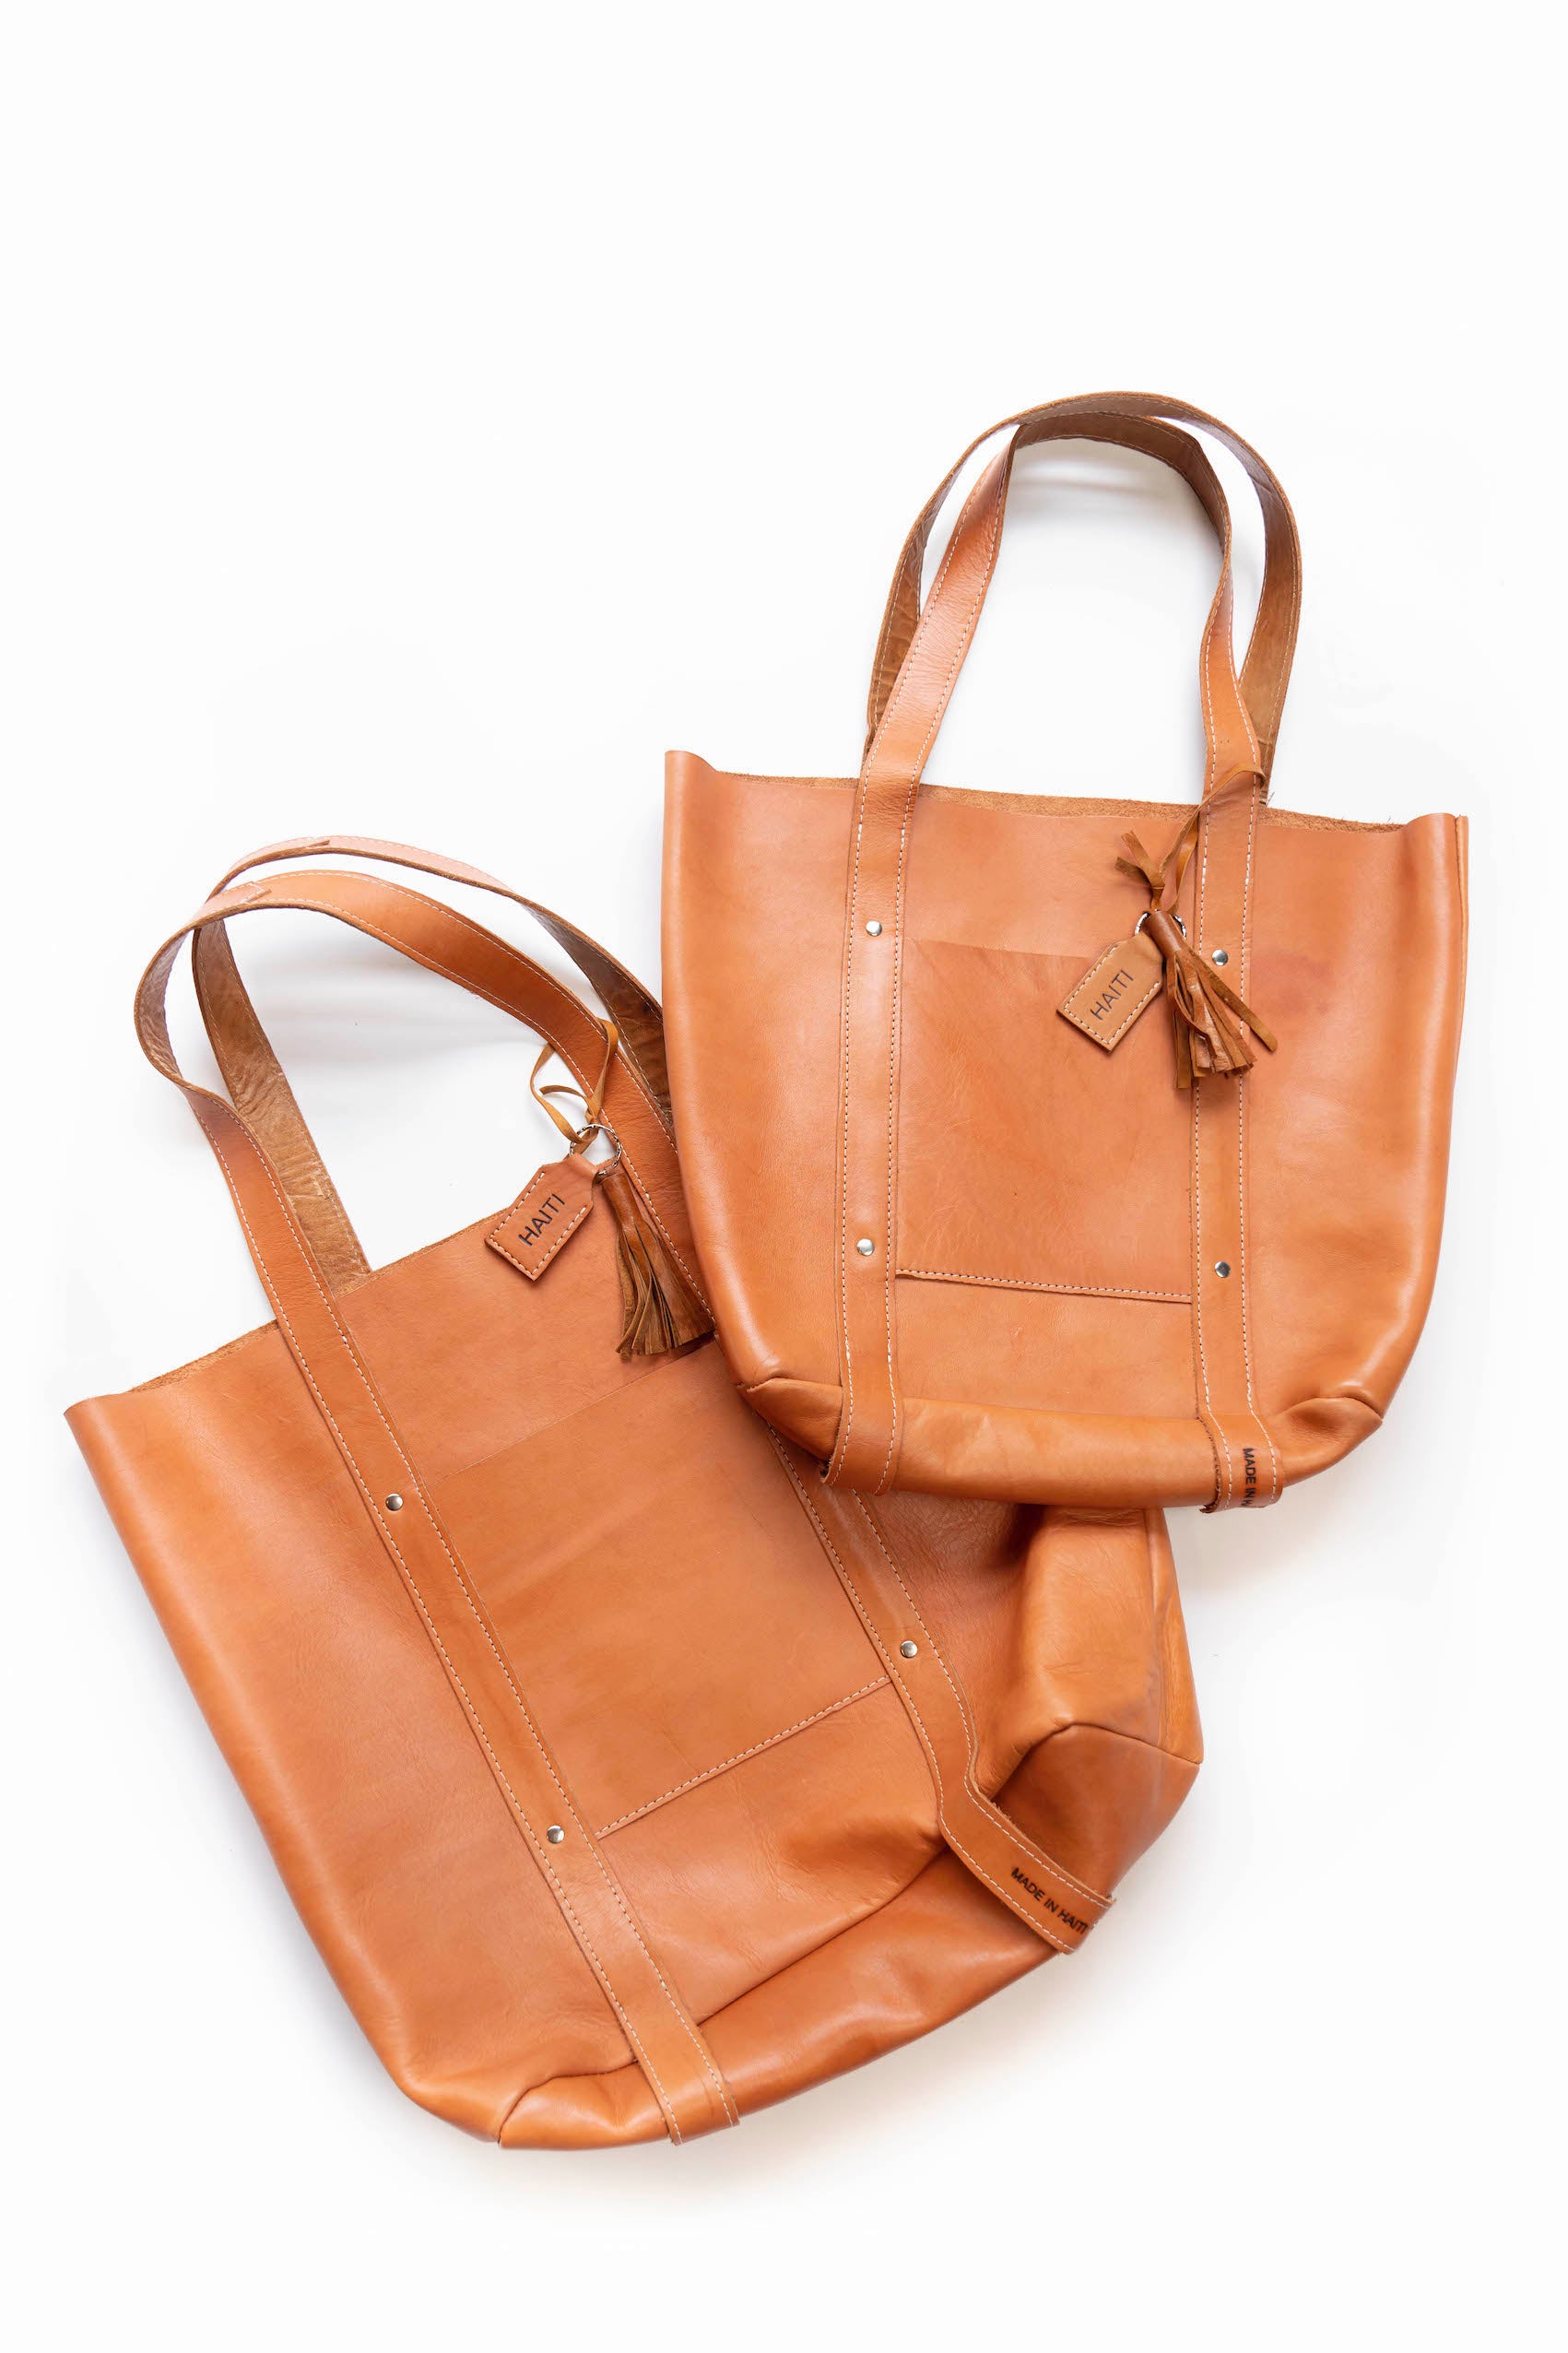 XL LEATHER TOTE BAG